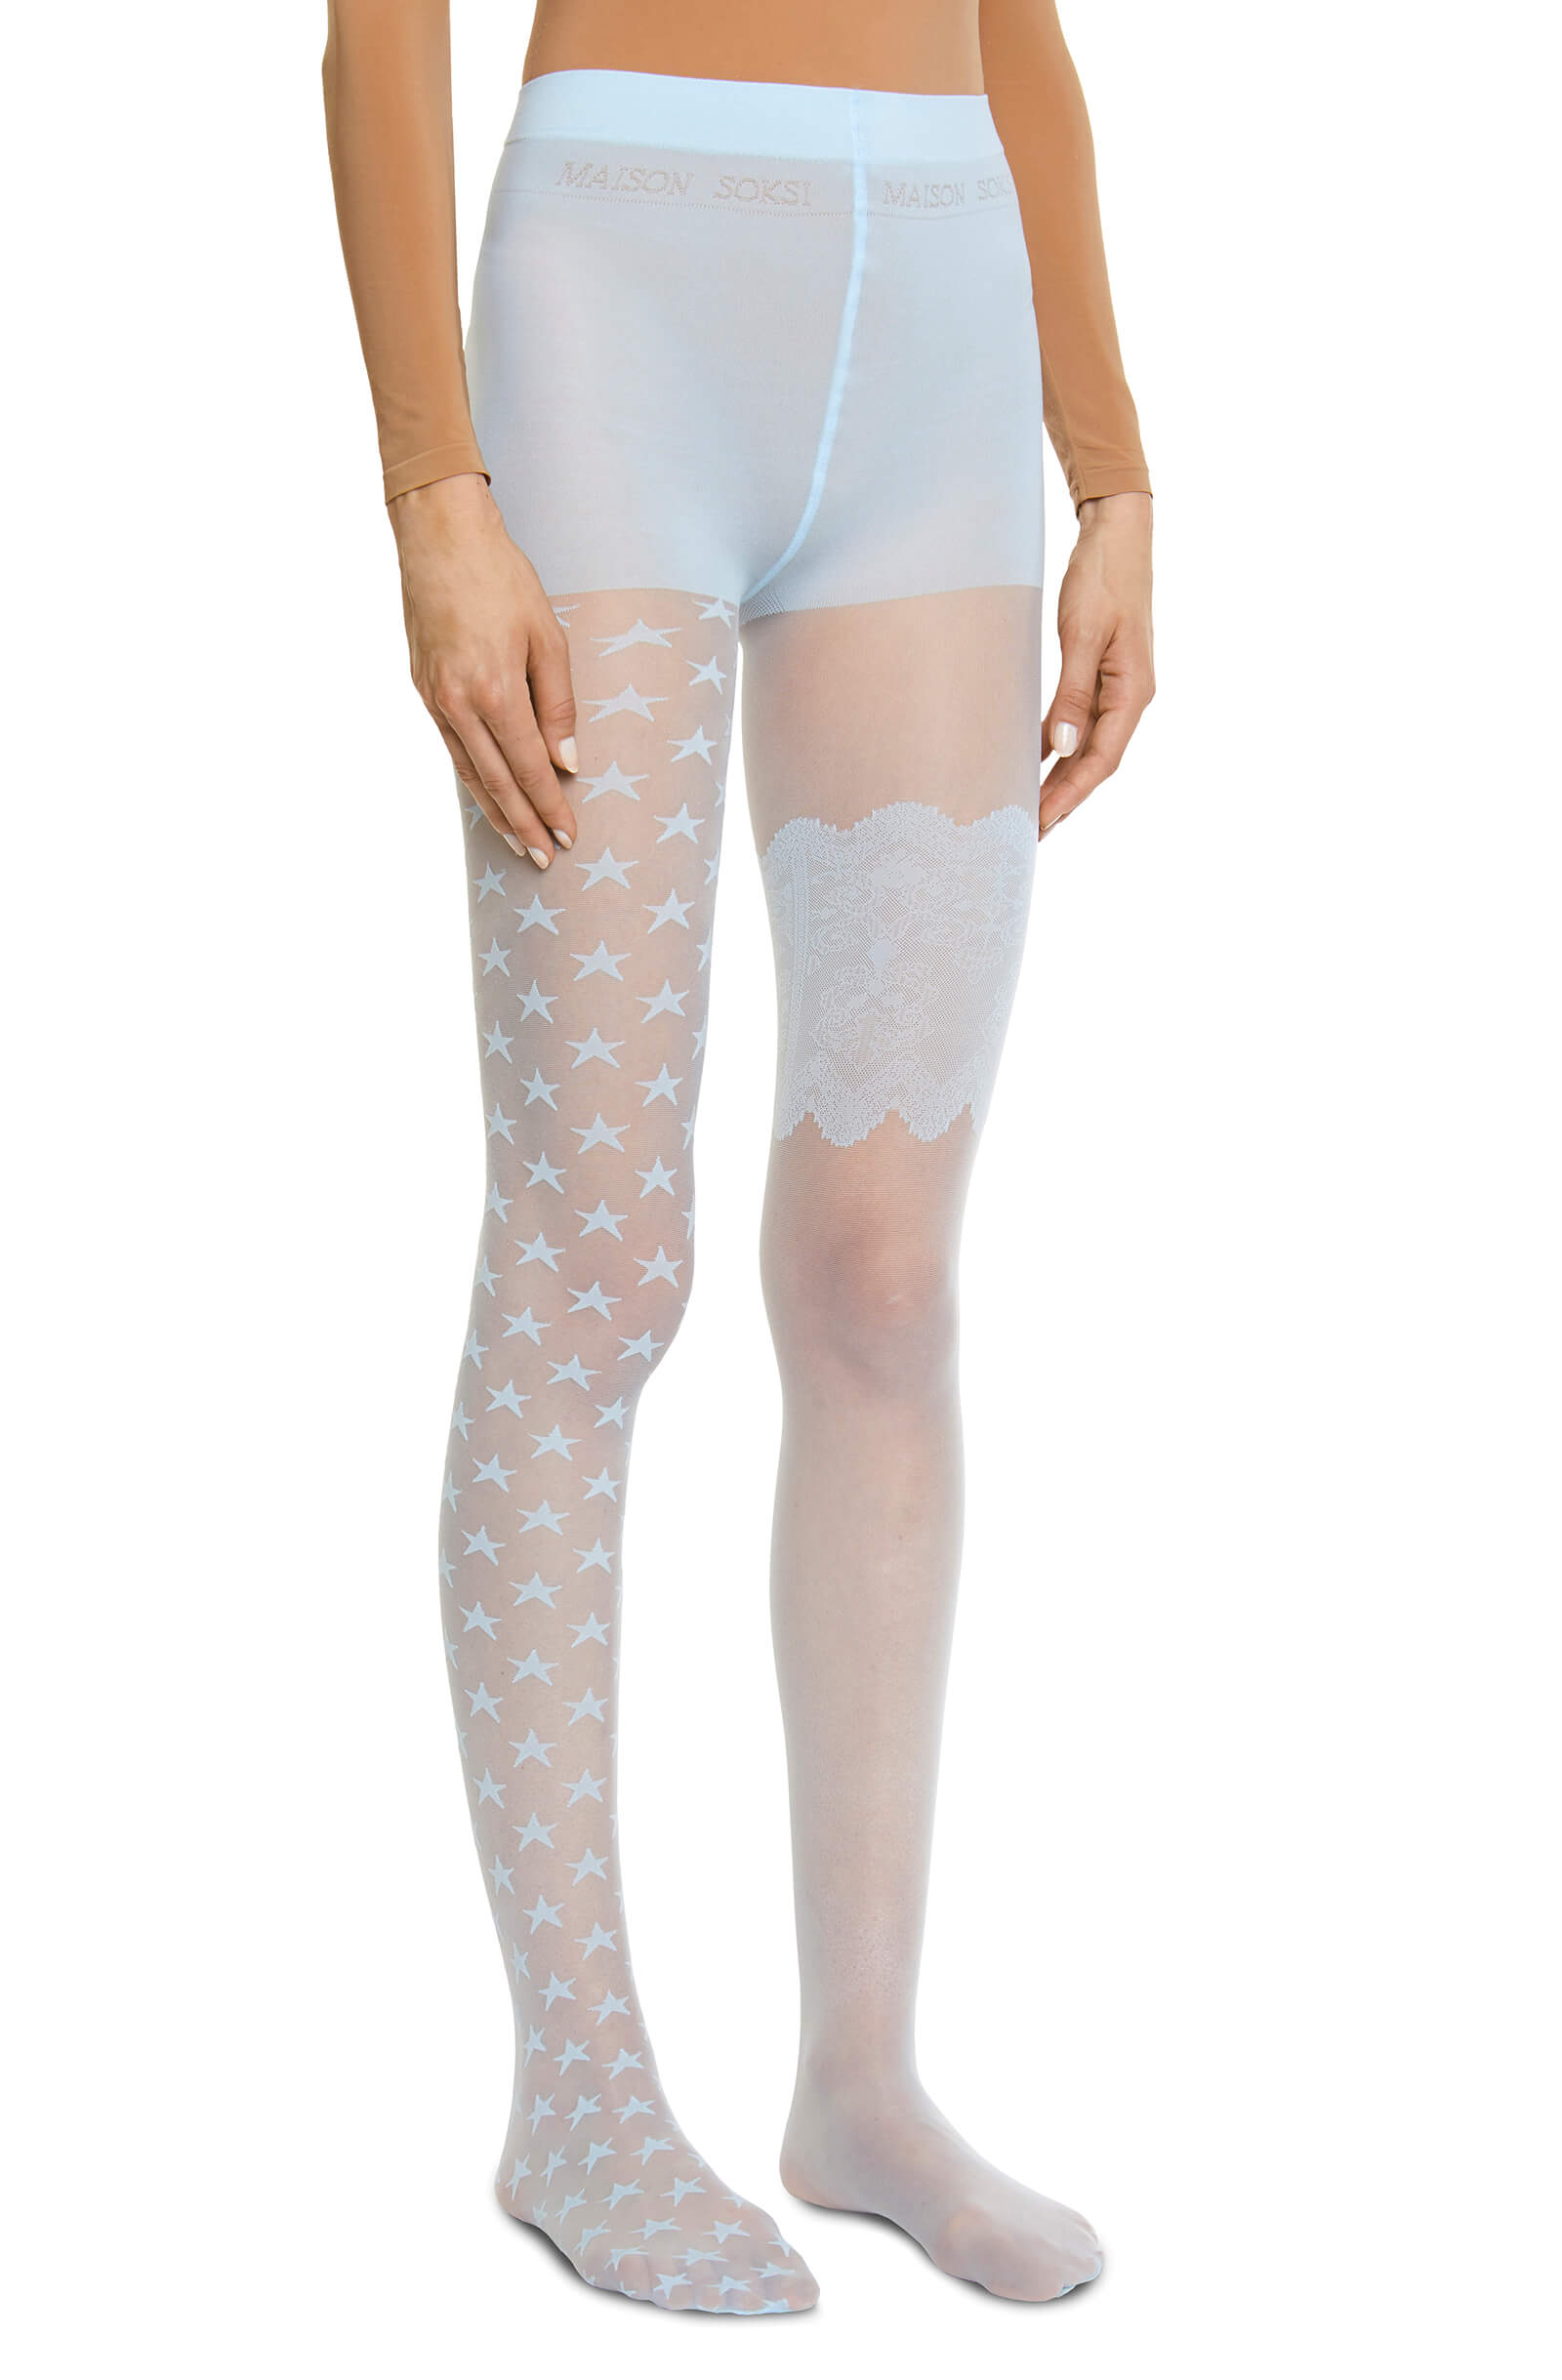 Blue Tights and pantyhose for Women